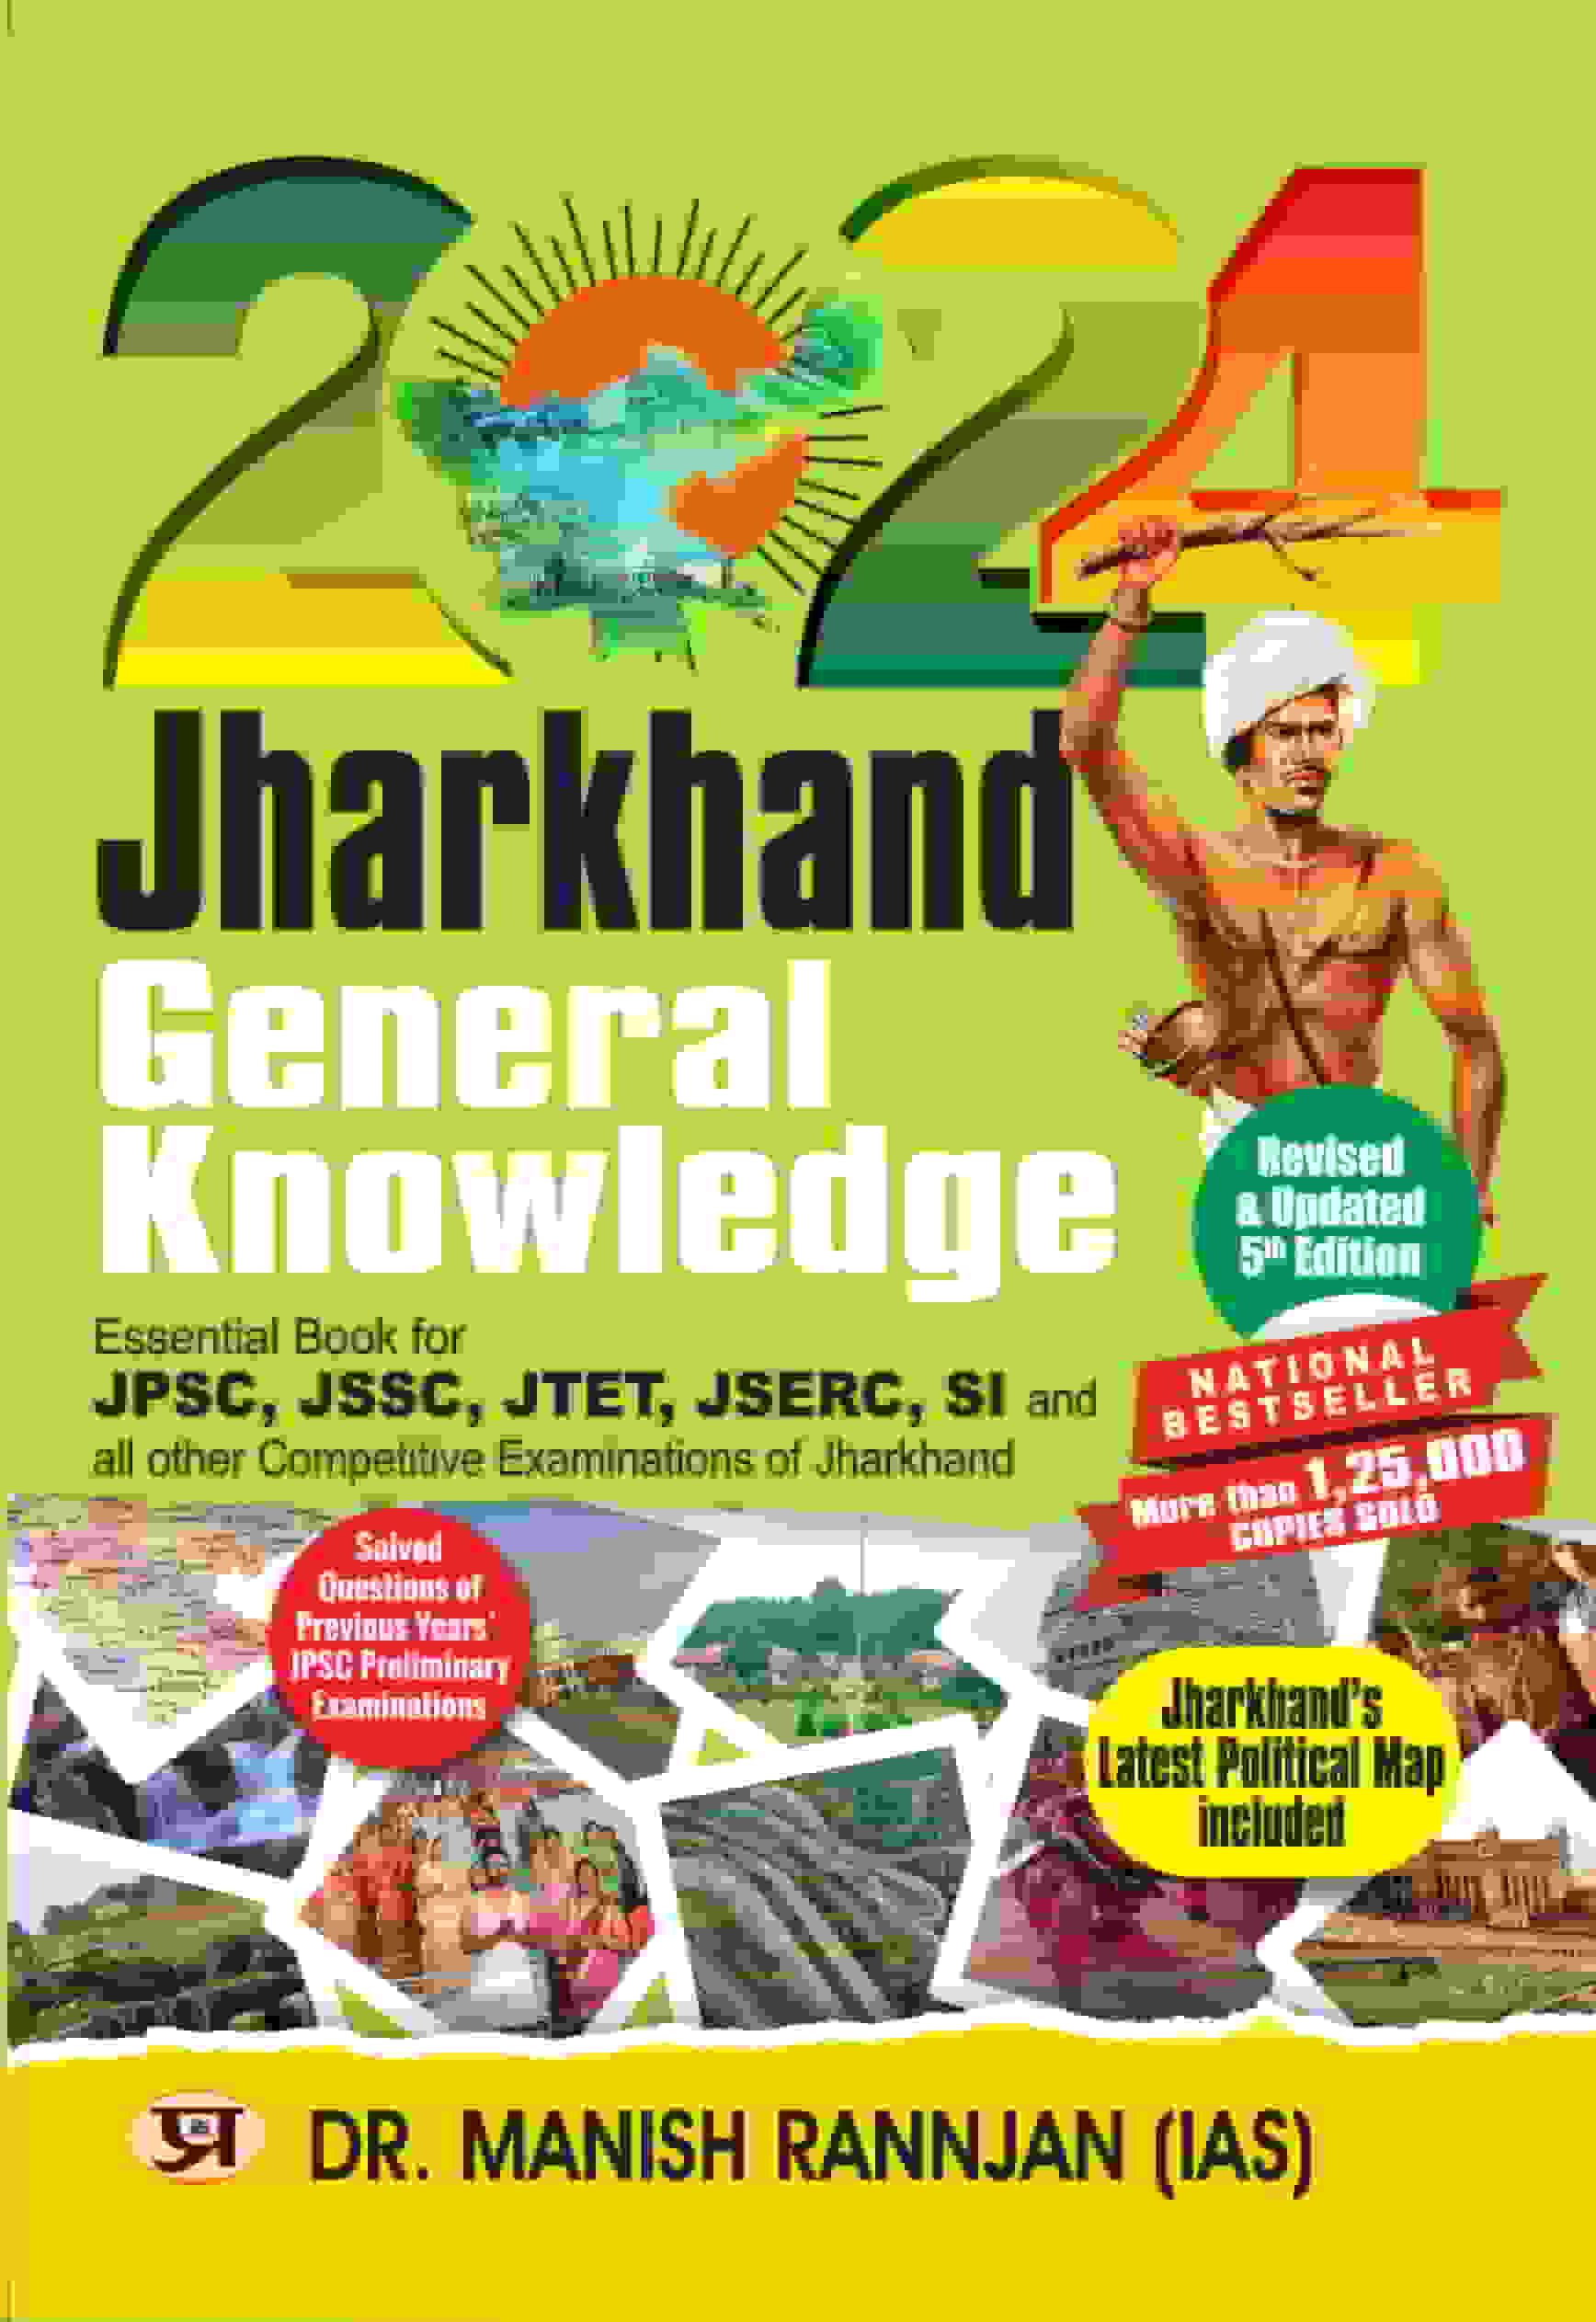 Jharkhand GK: General Knowledge Book for JPSC, JSSC, JTET, JSERC, SI and All Other Jharkhand Competitive Exam | Jharkhand Latest Political Map | Solved Question of Previous Years | Dr. Manish Rannjan 